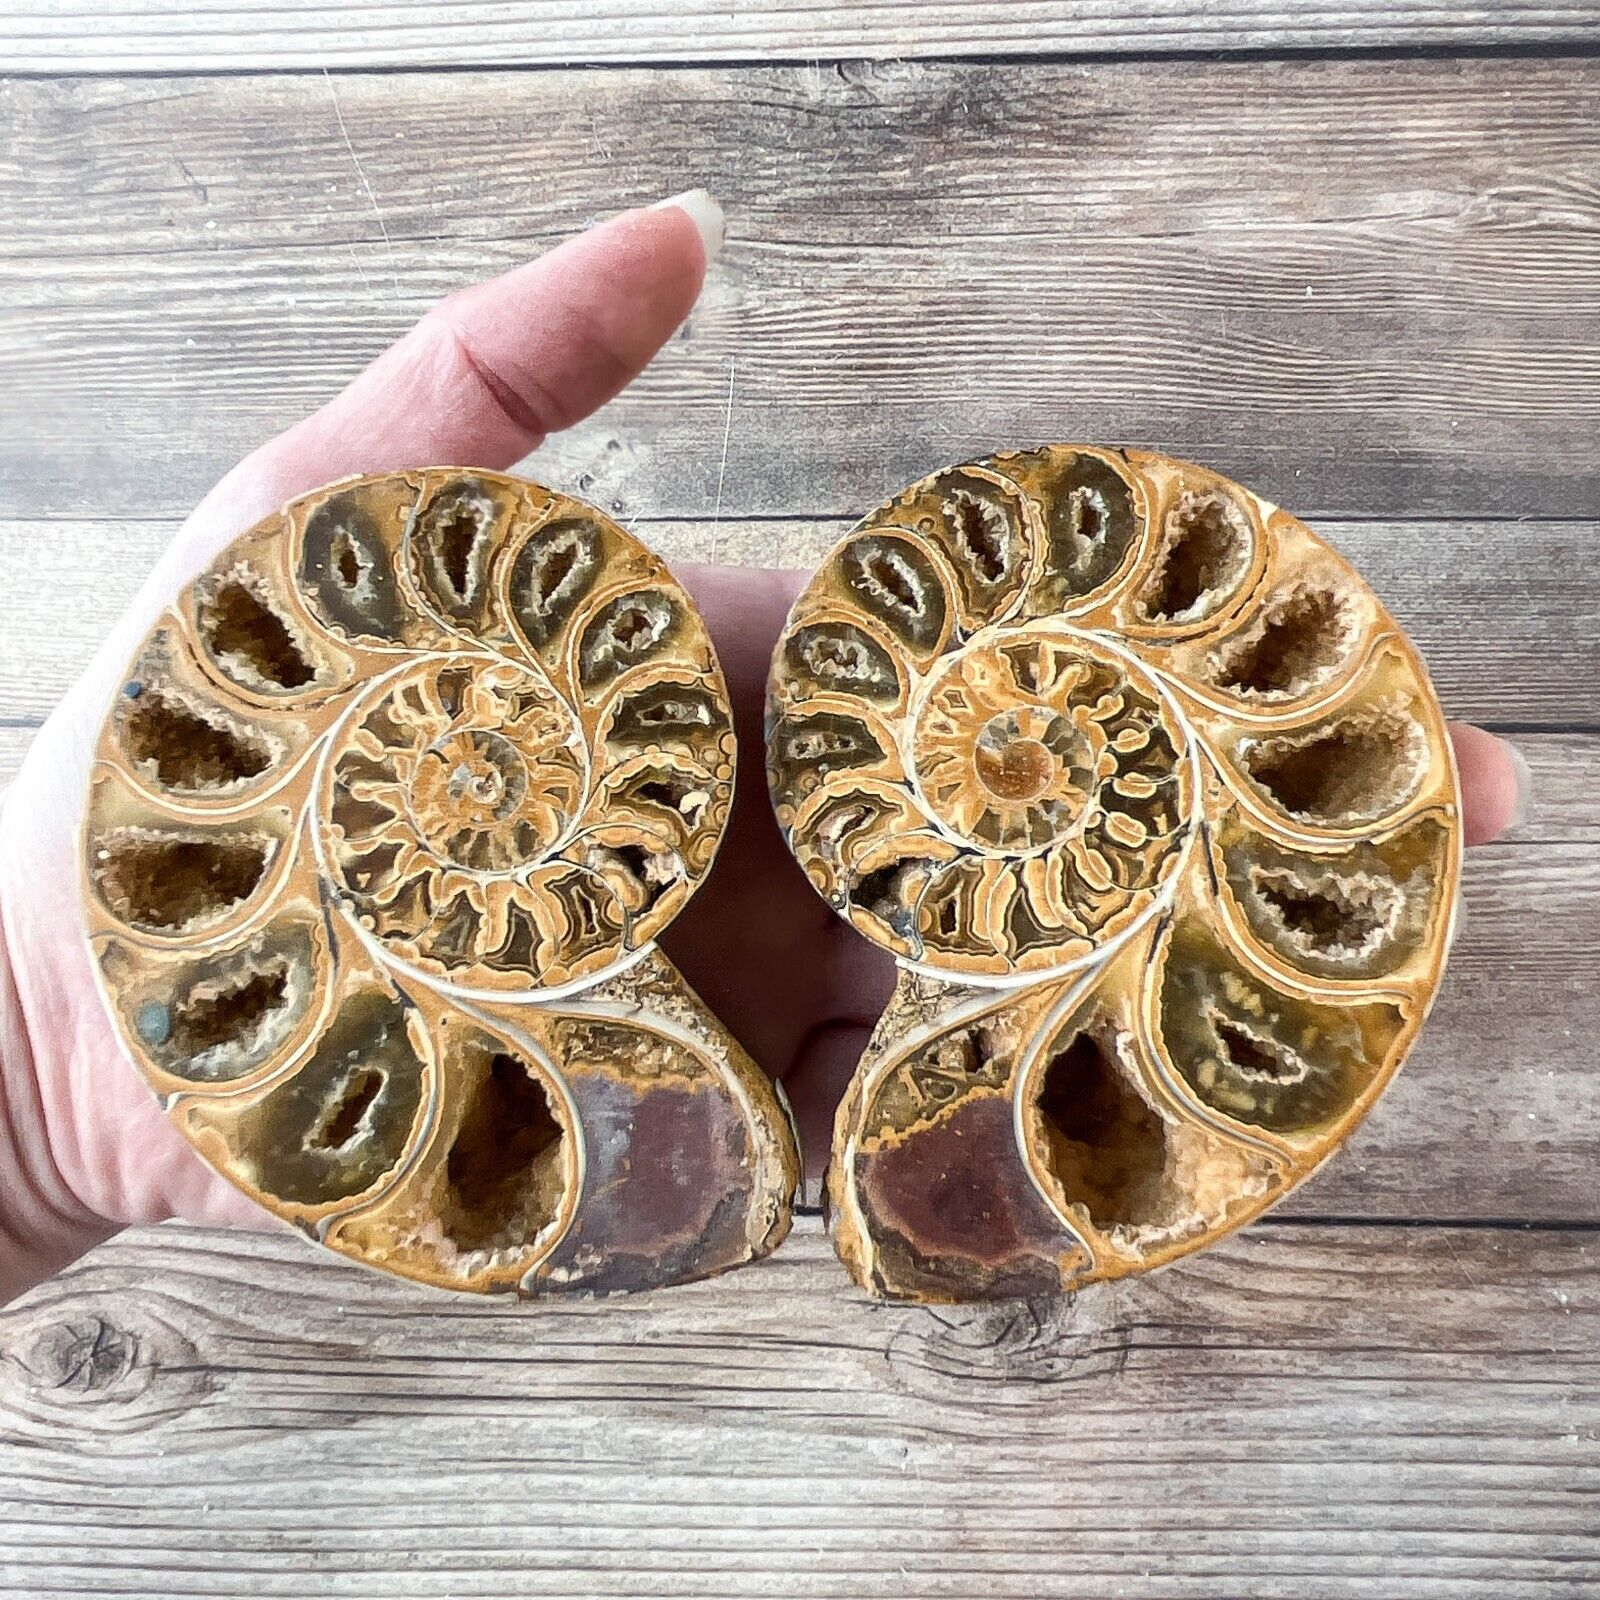 Ammonite Fossil Pair with Calcite Chambers 246g, Polished